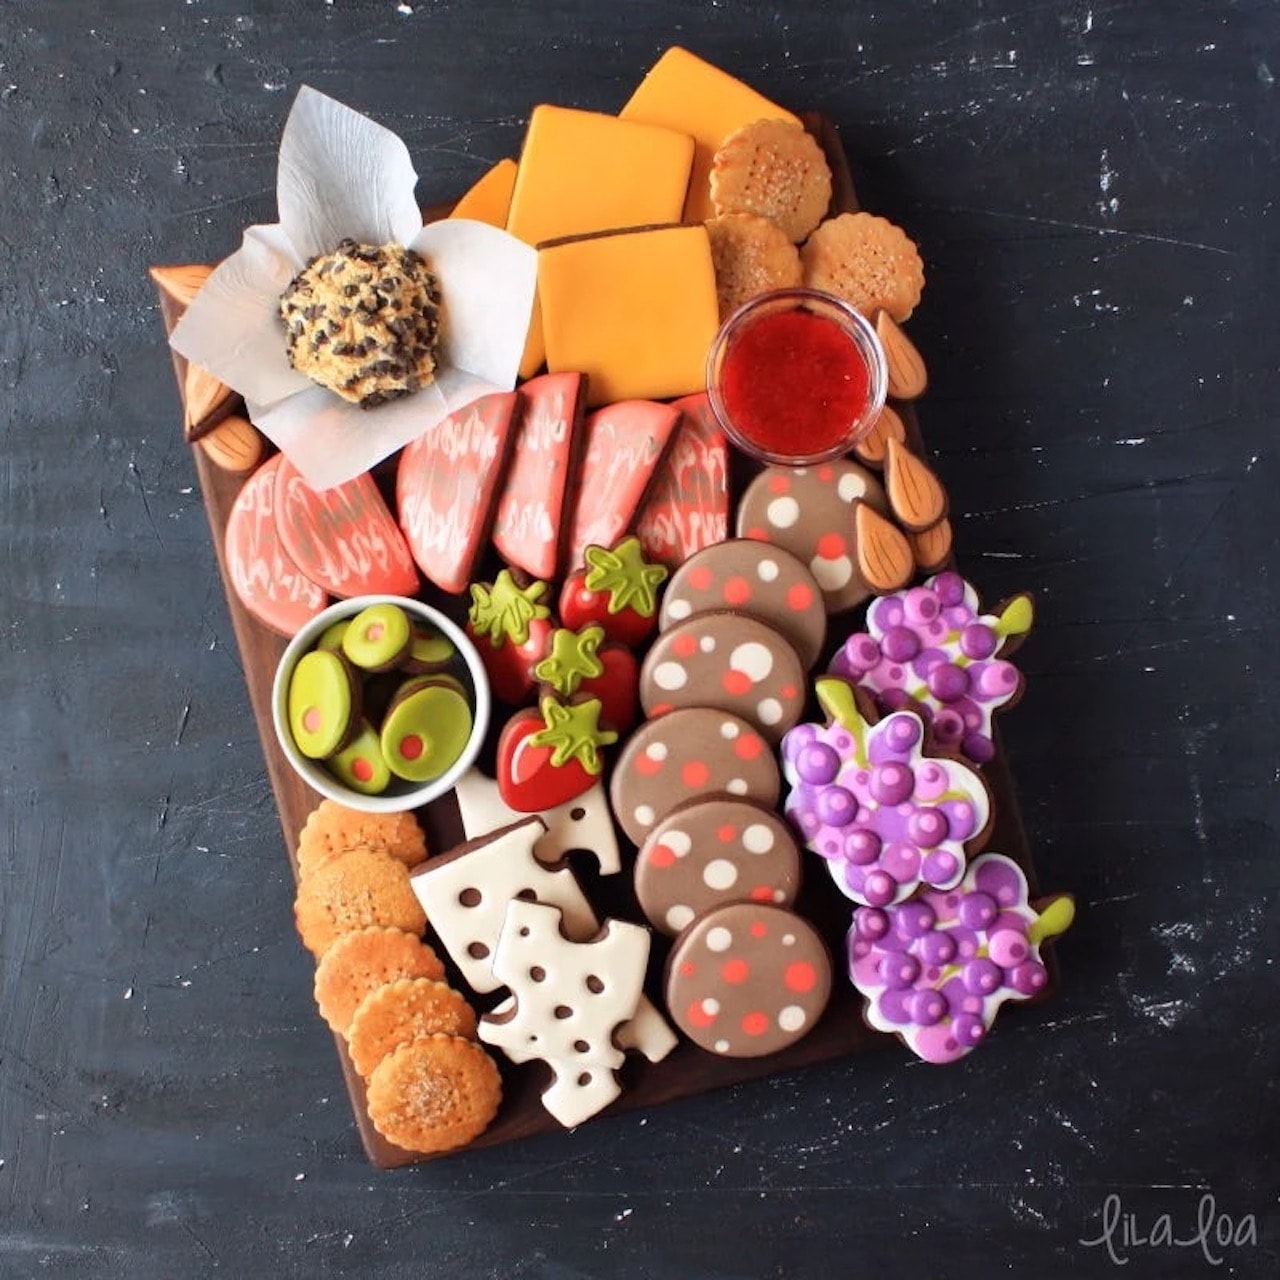 unique charcuterie boards ideas for the holidays dessert sugar cookies illusion fake meat